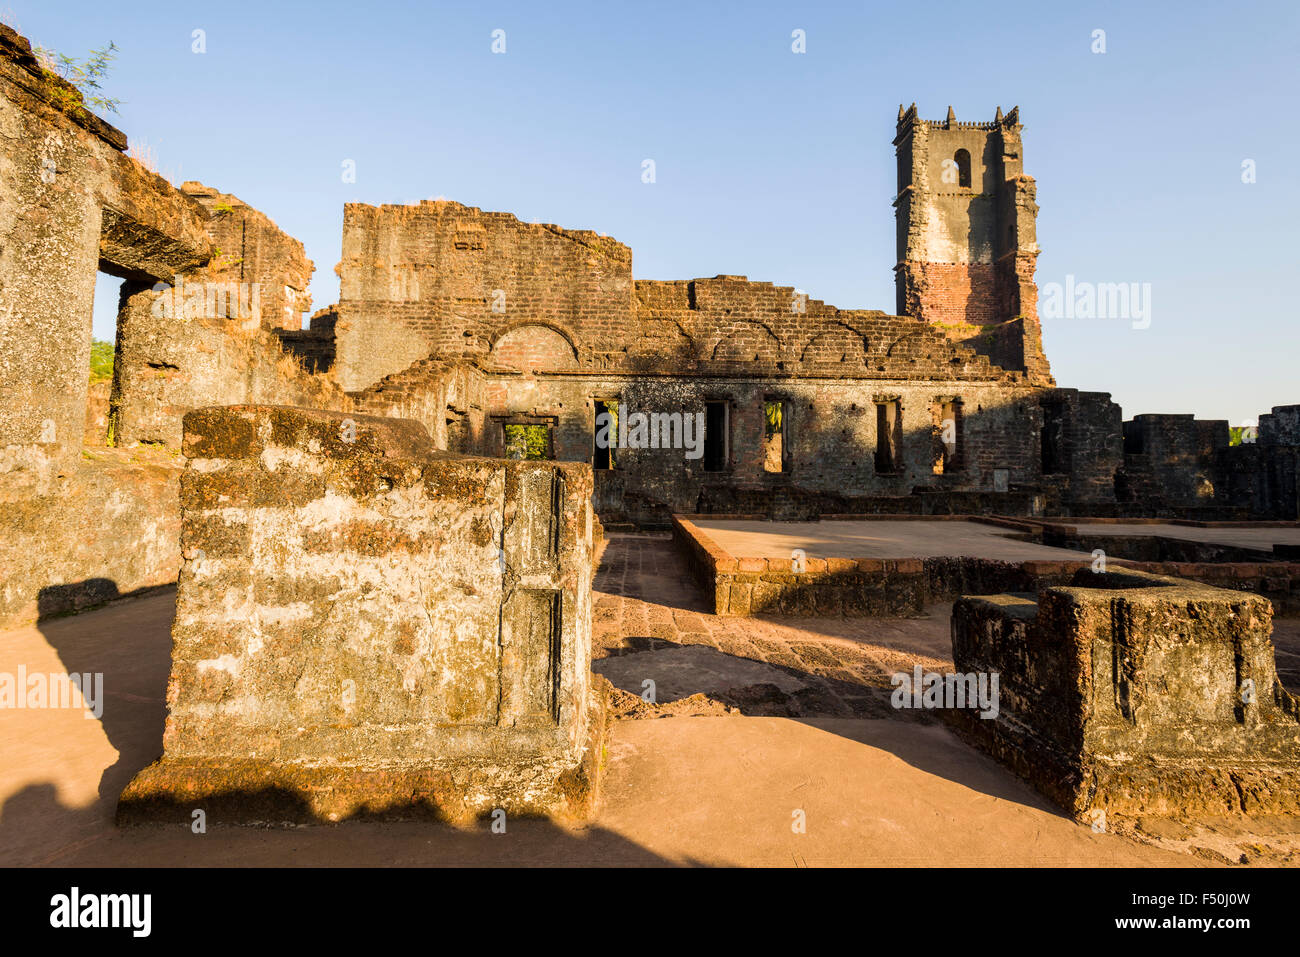 The ruins of the Convent of the Saint Augustin in Old Goa, one of the remaining big buildings built by the Portuguese in 16th ce Stock Photo